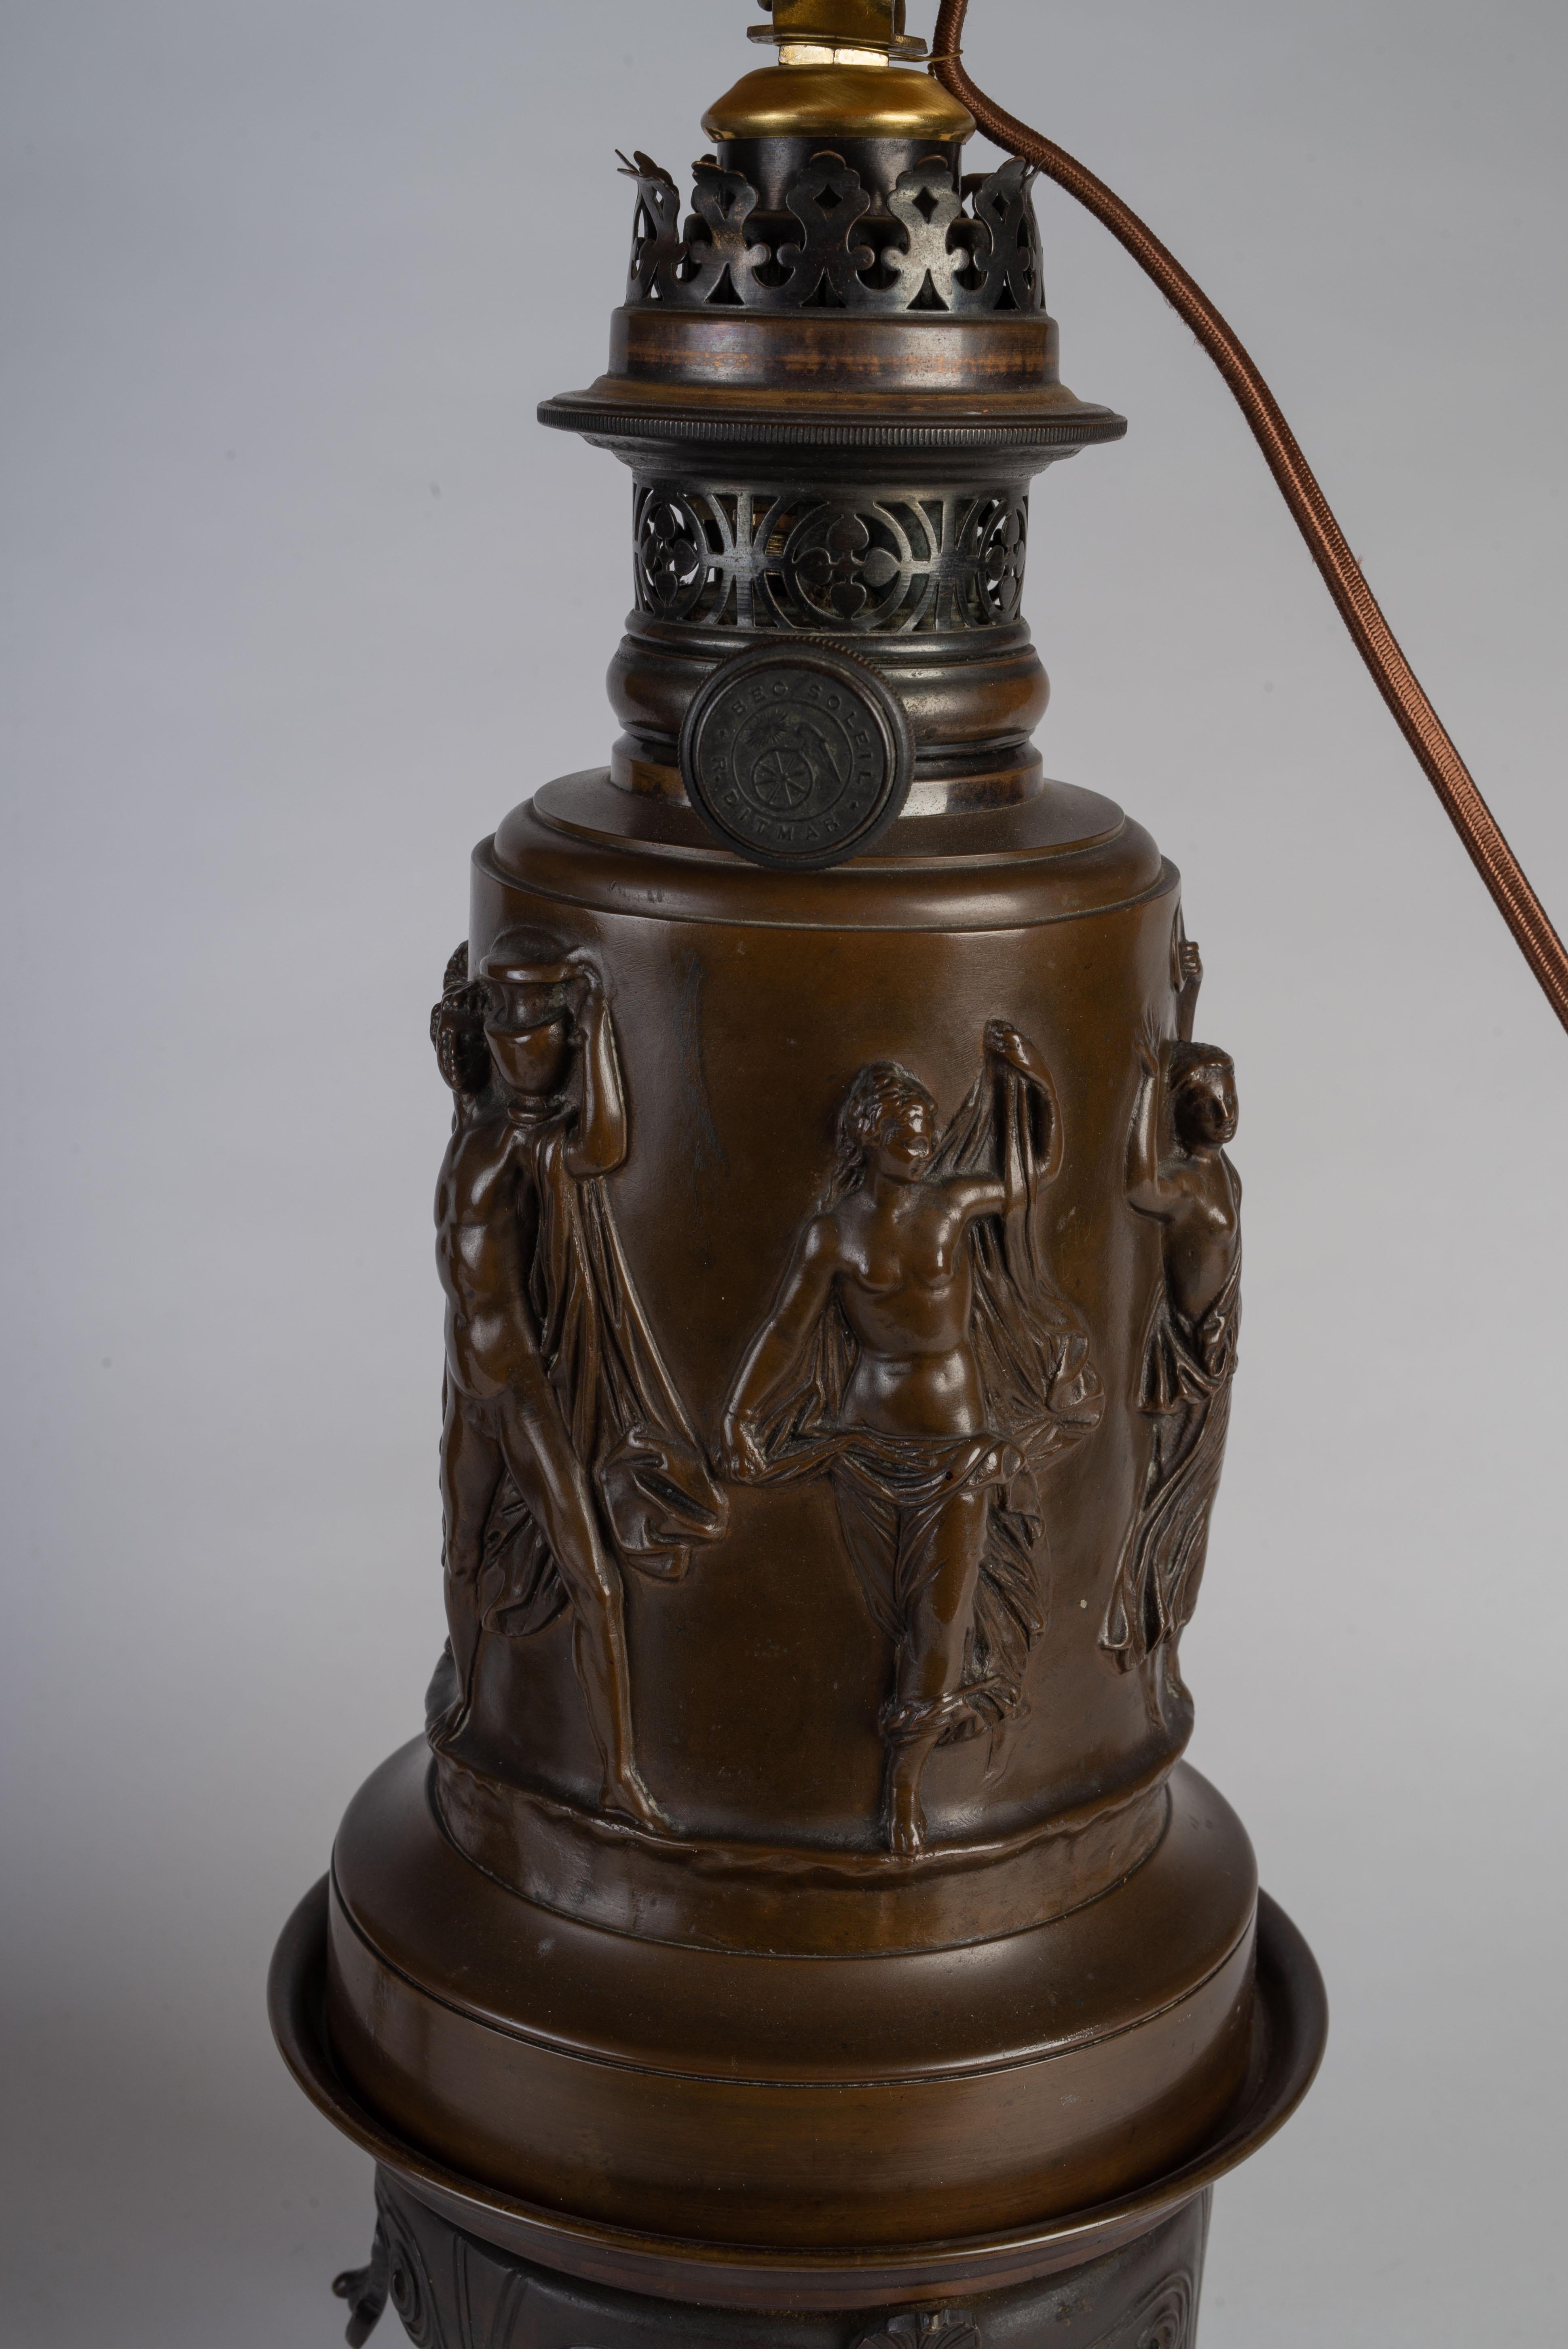 Each cast with neoclassical figures, on separate stands, each impressed Bec Boleil, R.D. Ditmar. Electrified.
With a Sotheby’s New York provenance.

Measures: Height of base only is 14.5in.